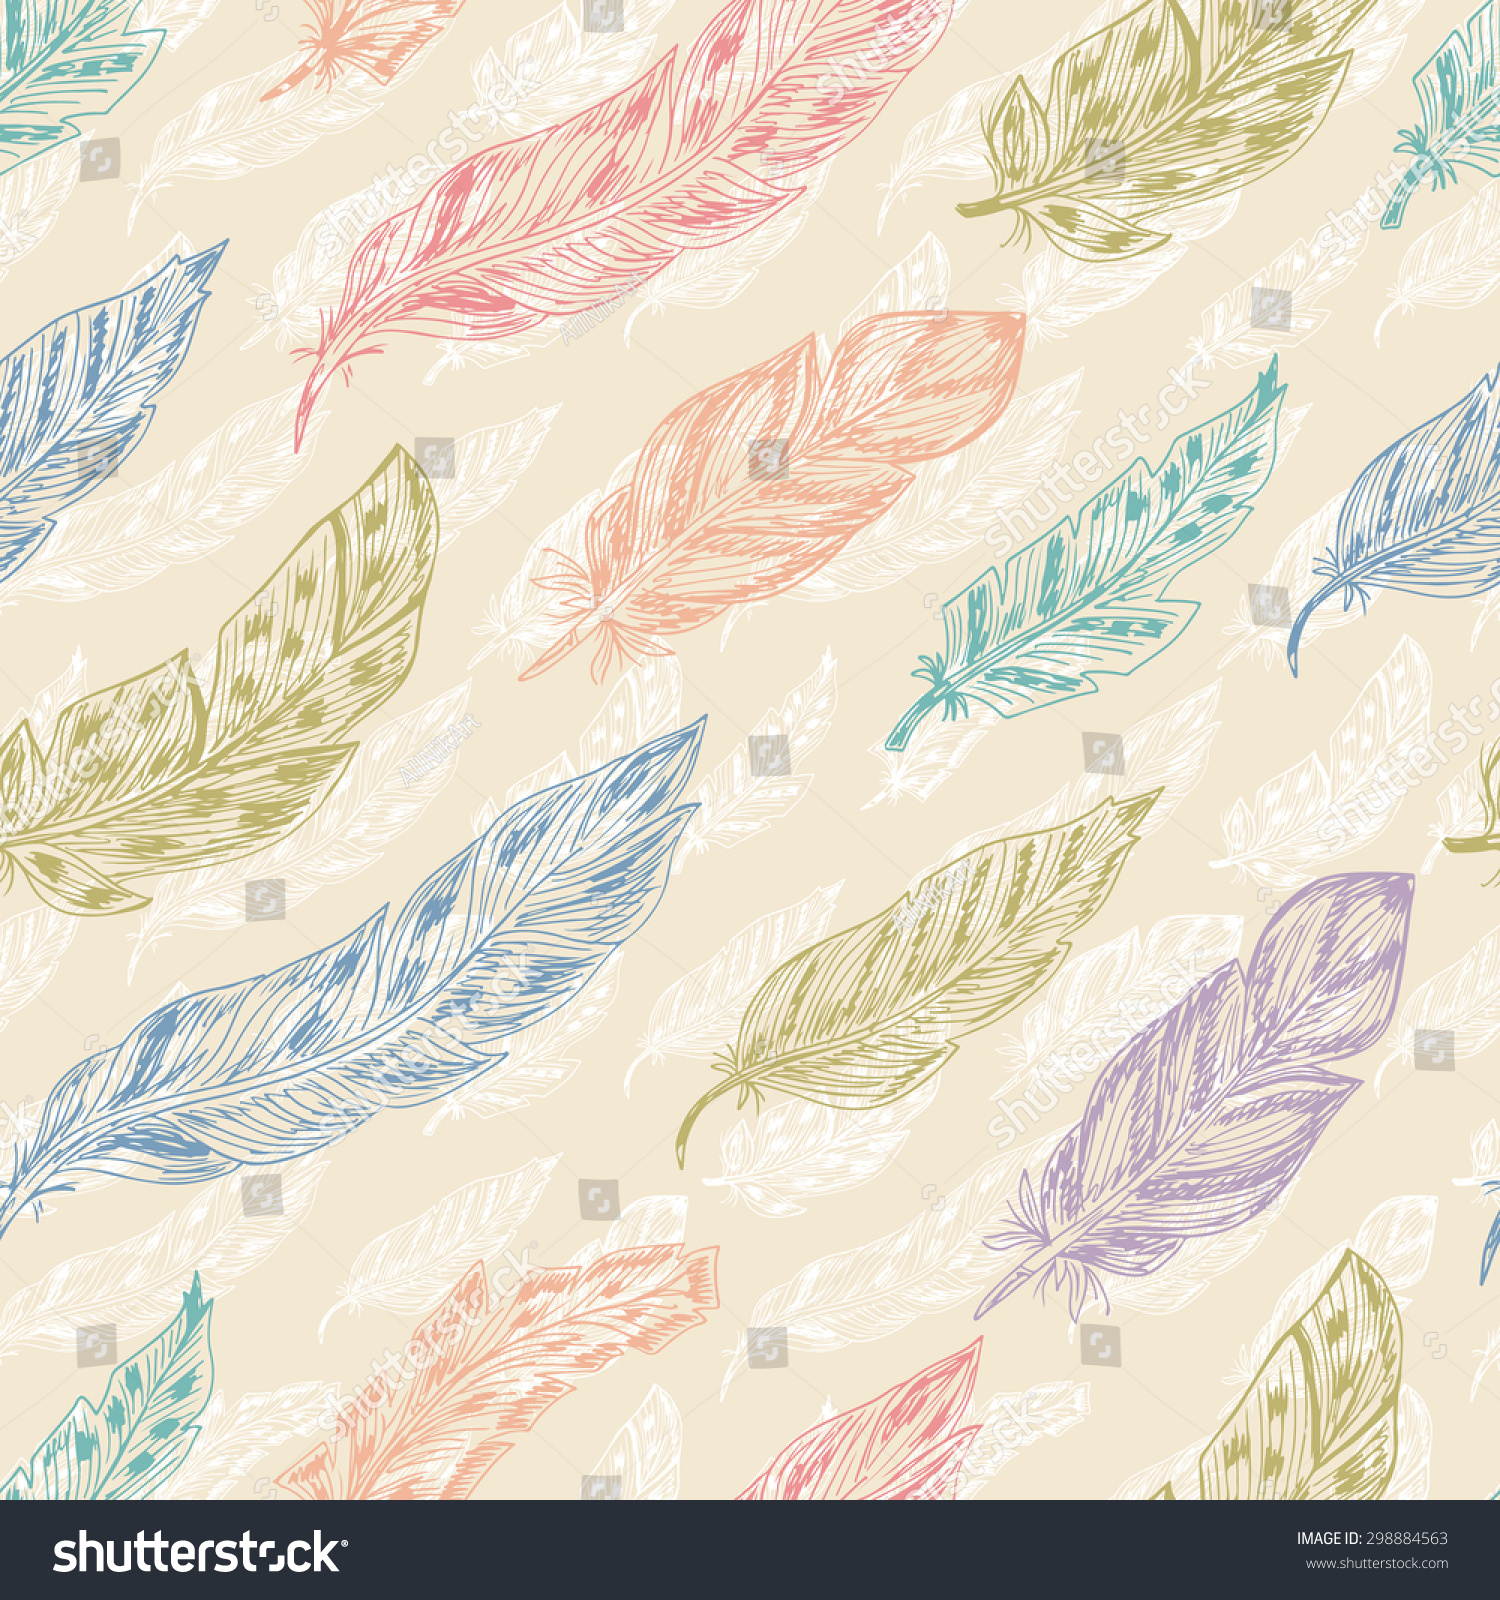 Feathers Seamless Pattern Colorful Vintage Stock Vector